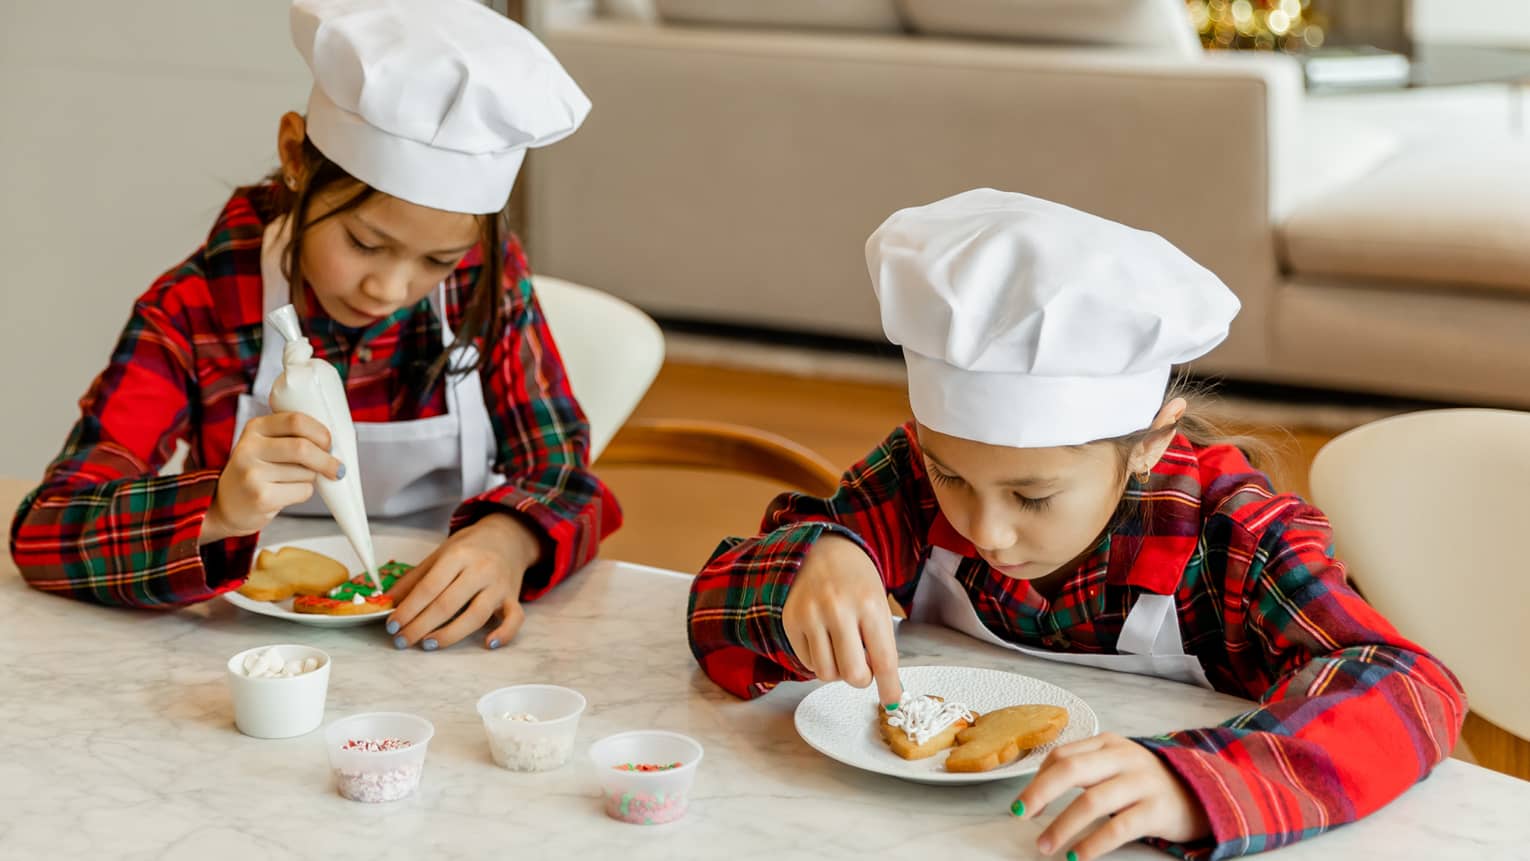 Two children wearing chef hats and decorating cookies.